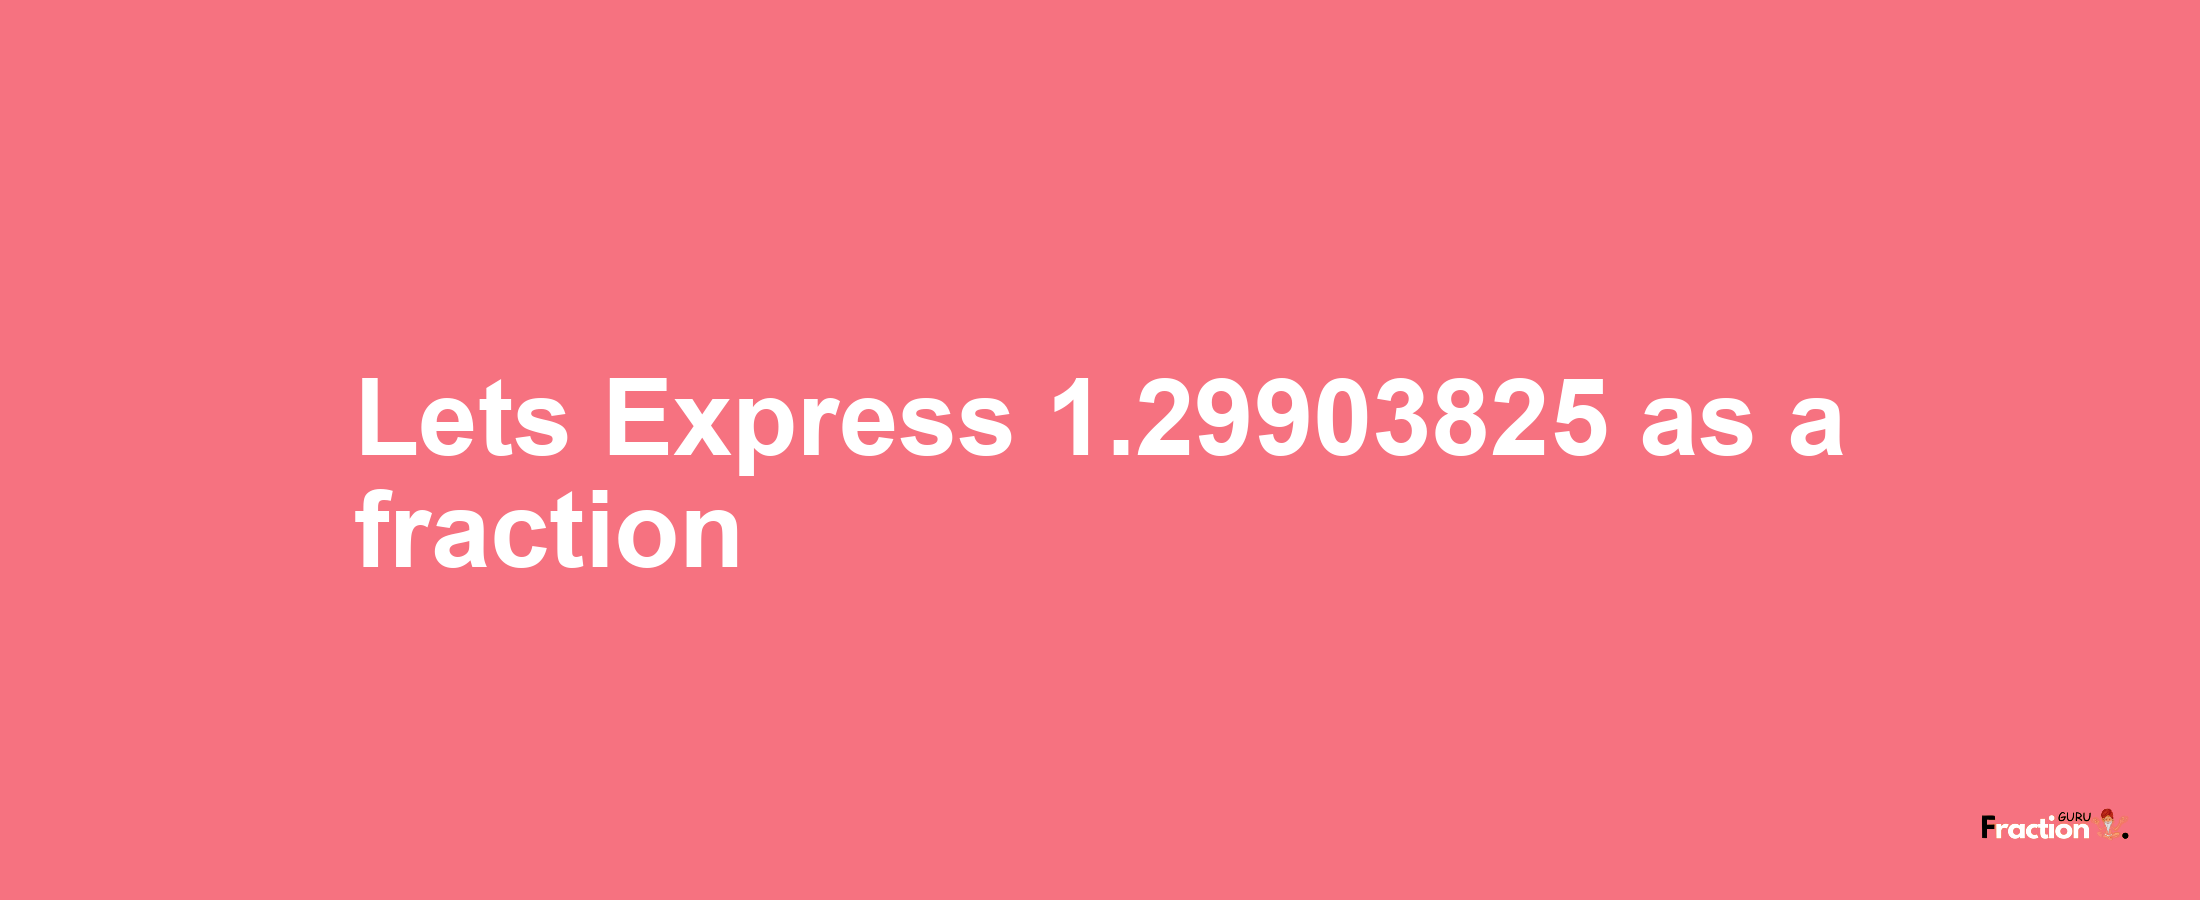 Lets Express 1.29903825 as afraction